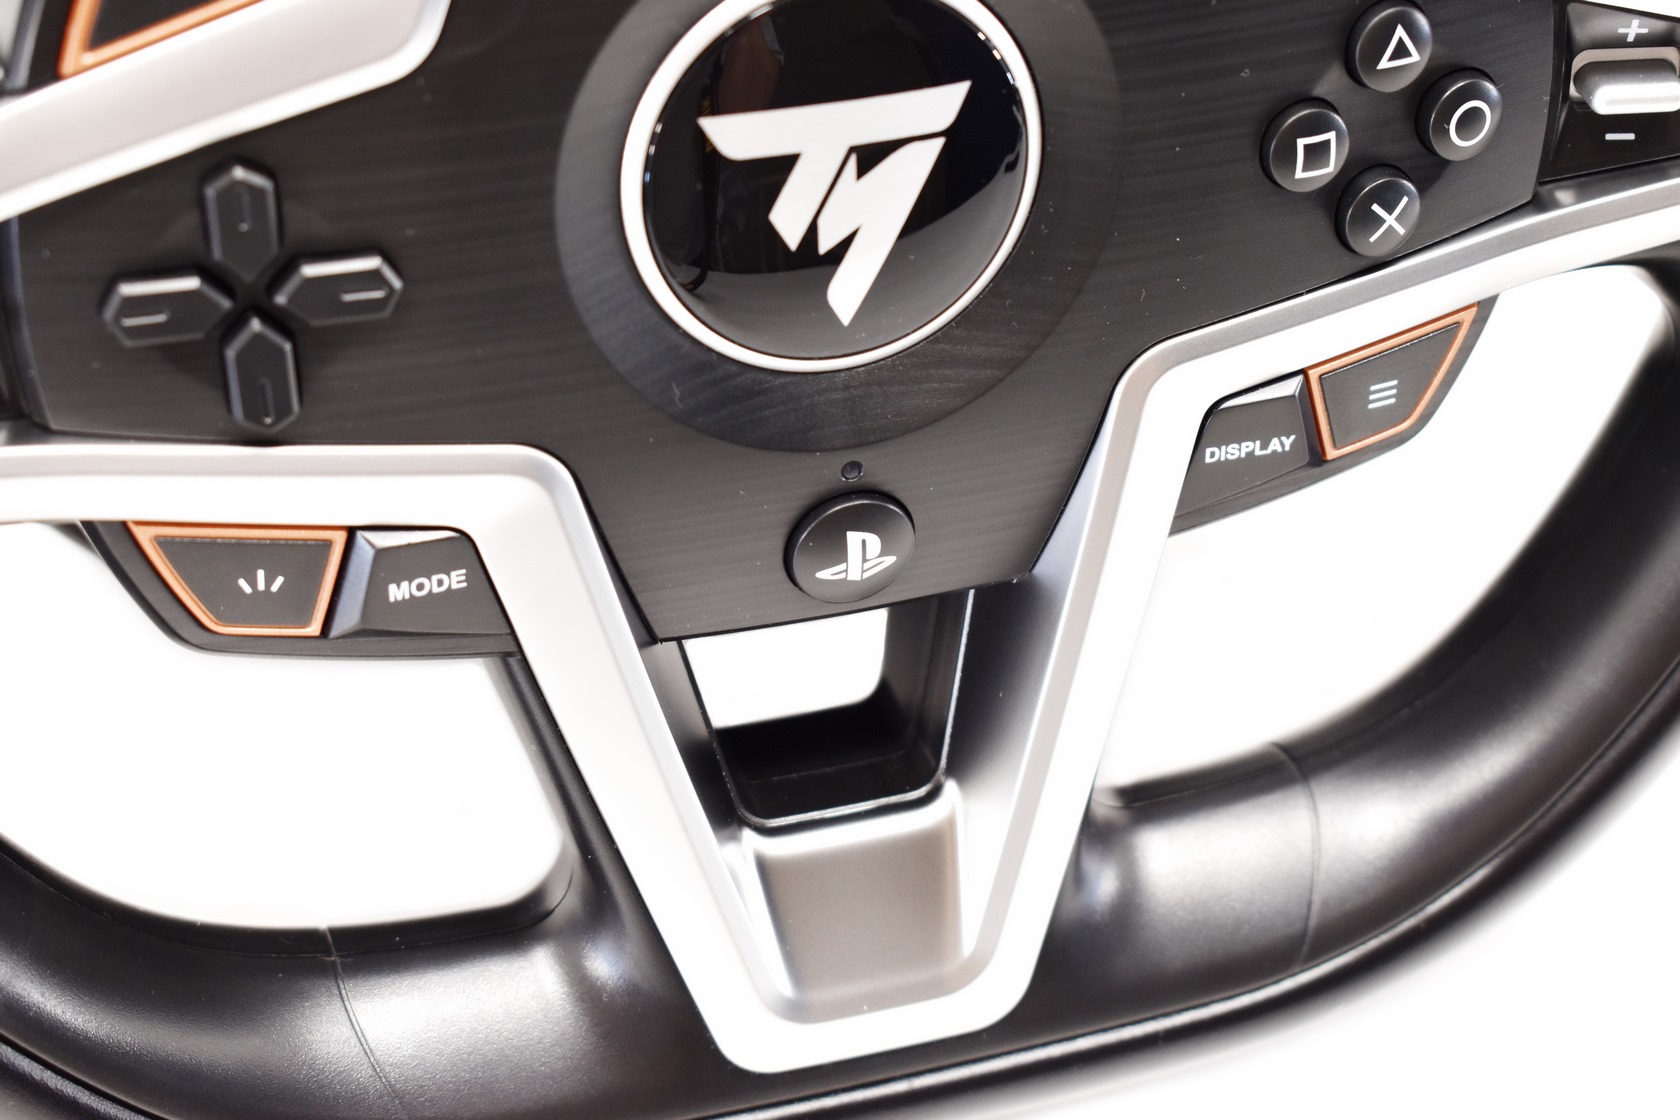 The Thrustmaster T248 Wheel Review